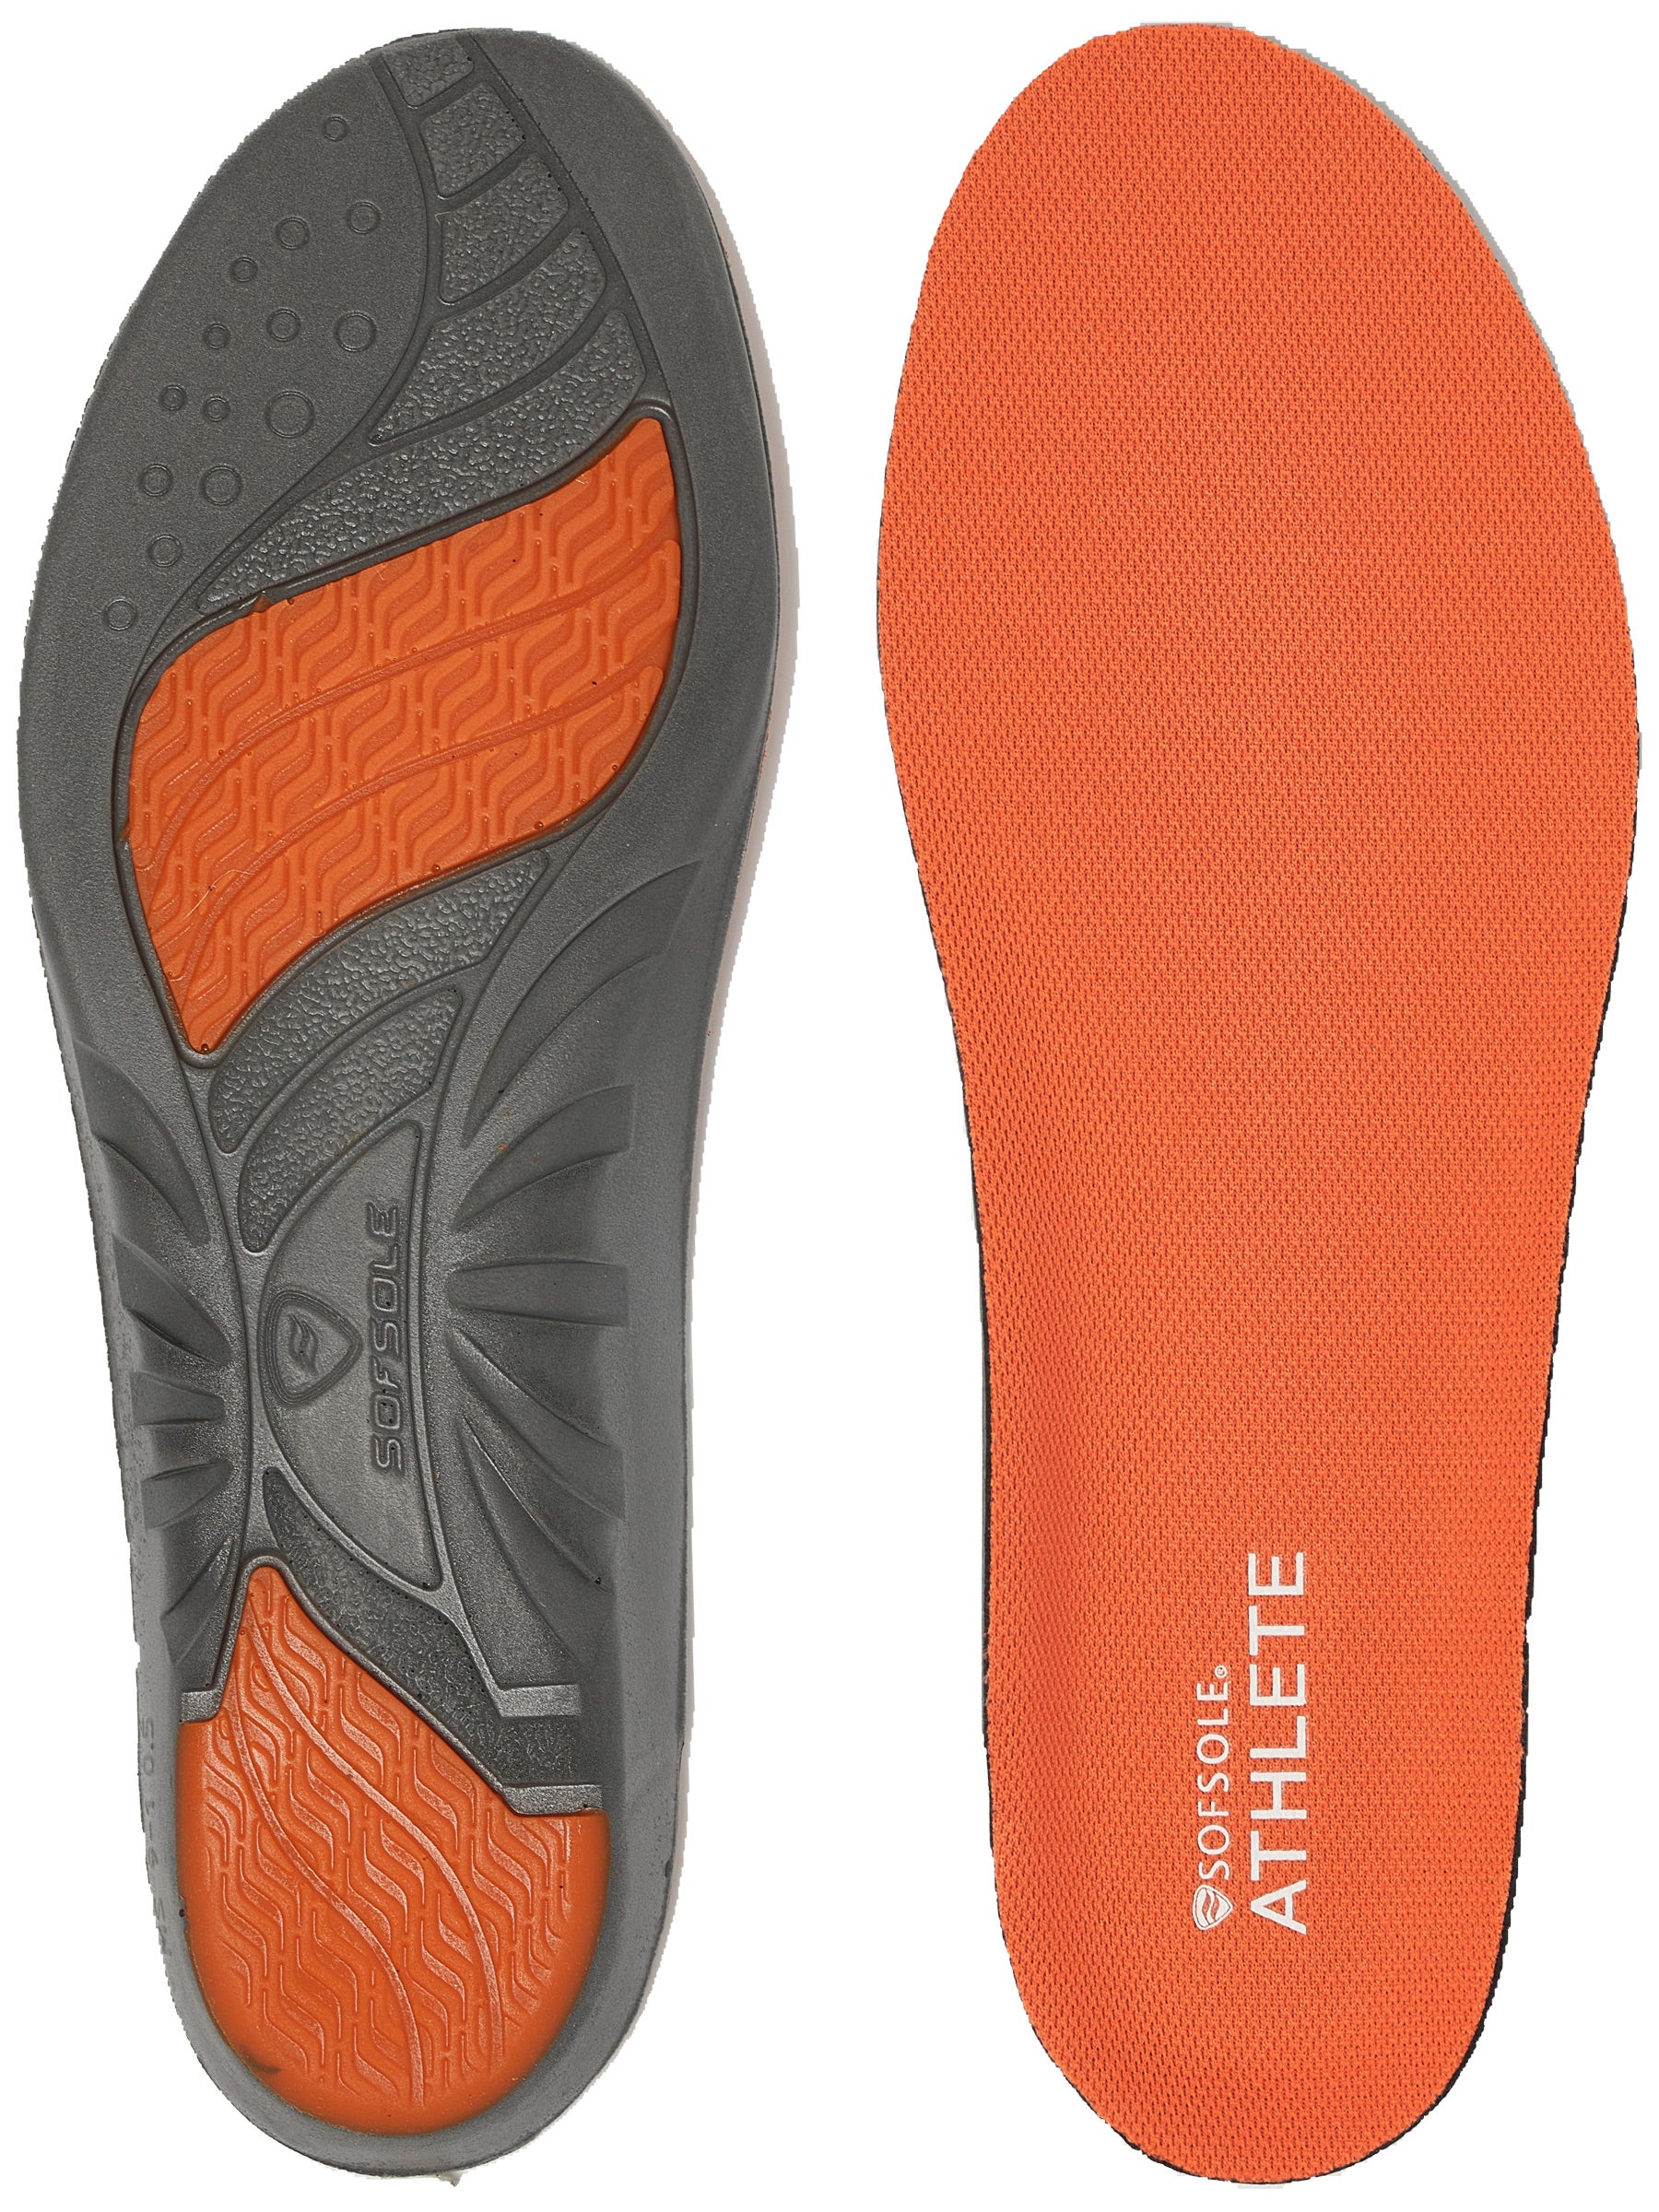 Sof Sole Performance Athletic Shoe Insoles 